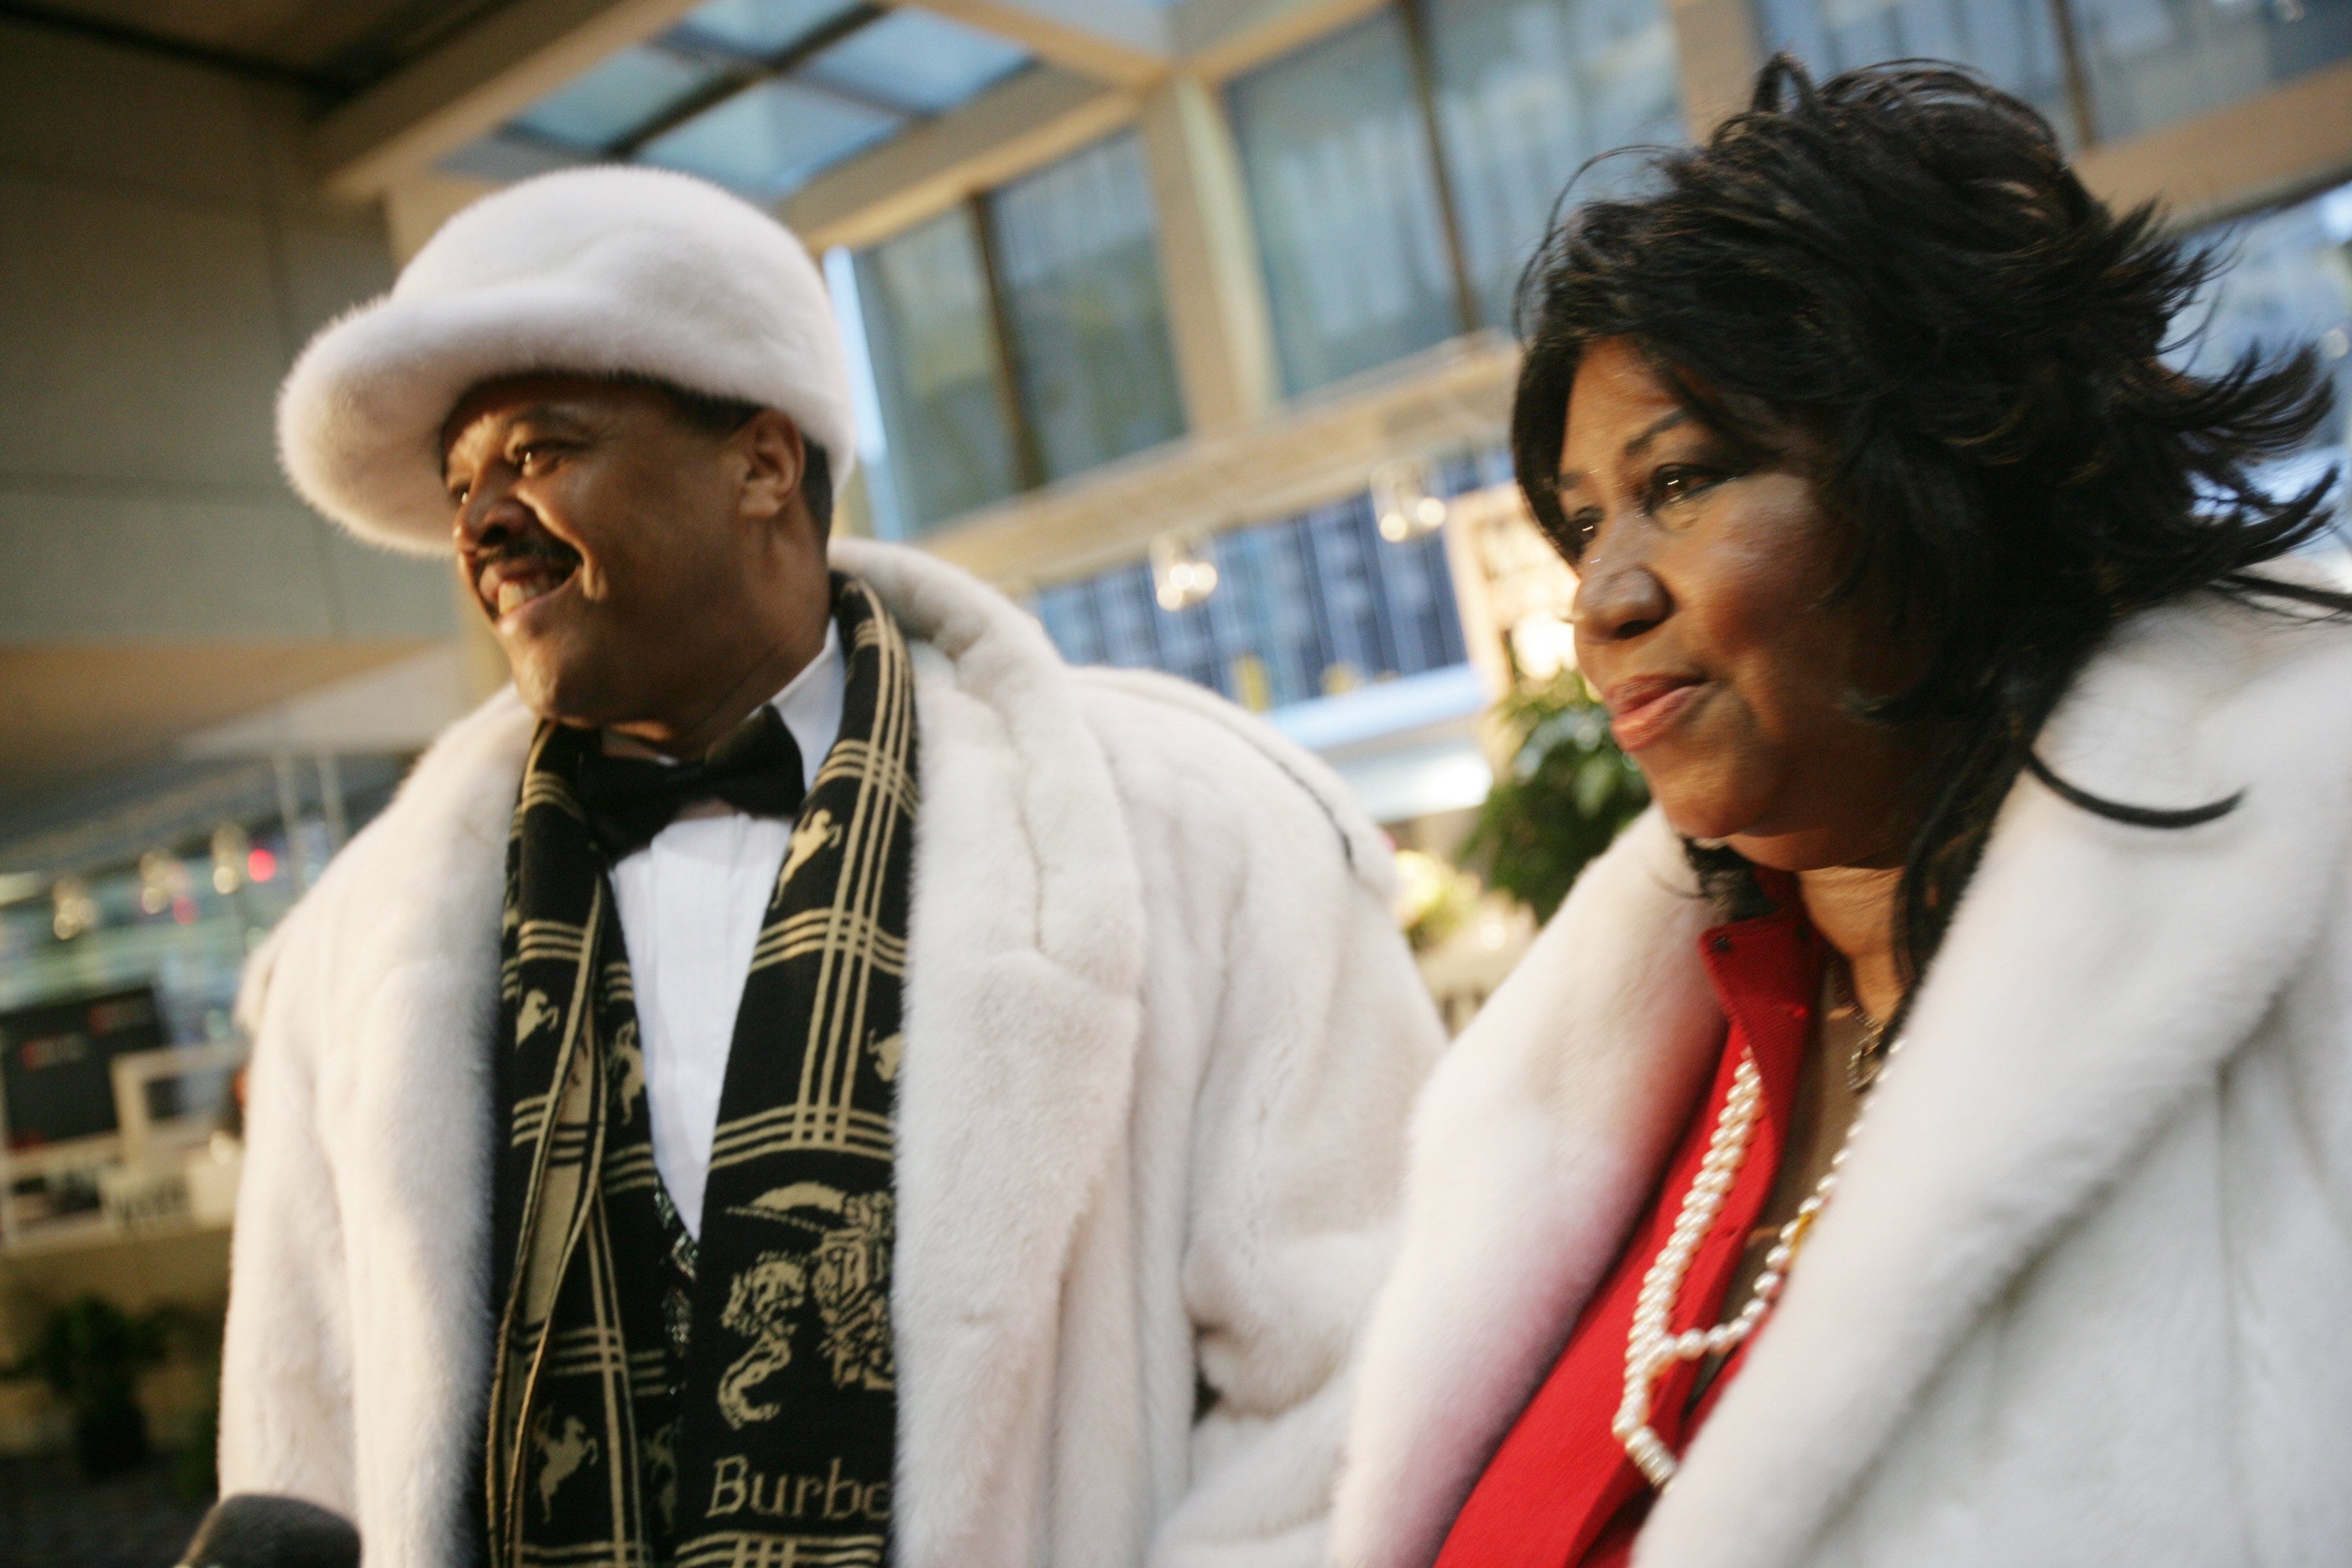 Detroit's Queen of Soul, Aretha Franklin, right, arrives Friday, January 13, 2006, at the North American International Auto Show Charity Preview with her date, Willie Wilkerson.